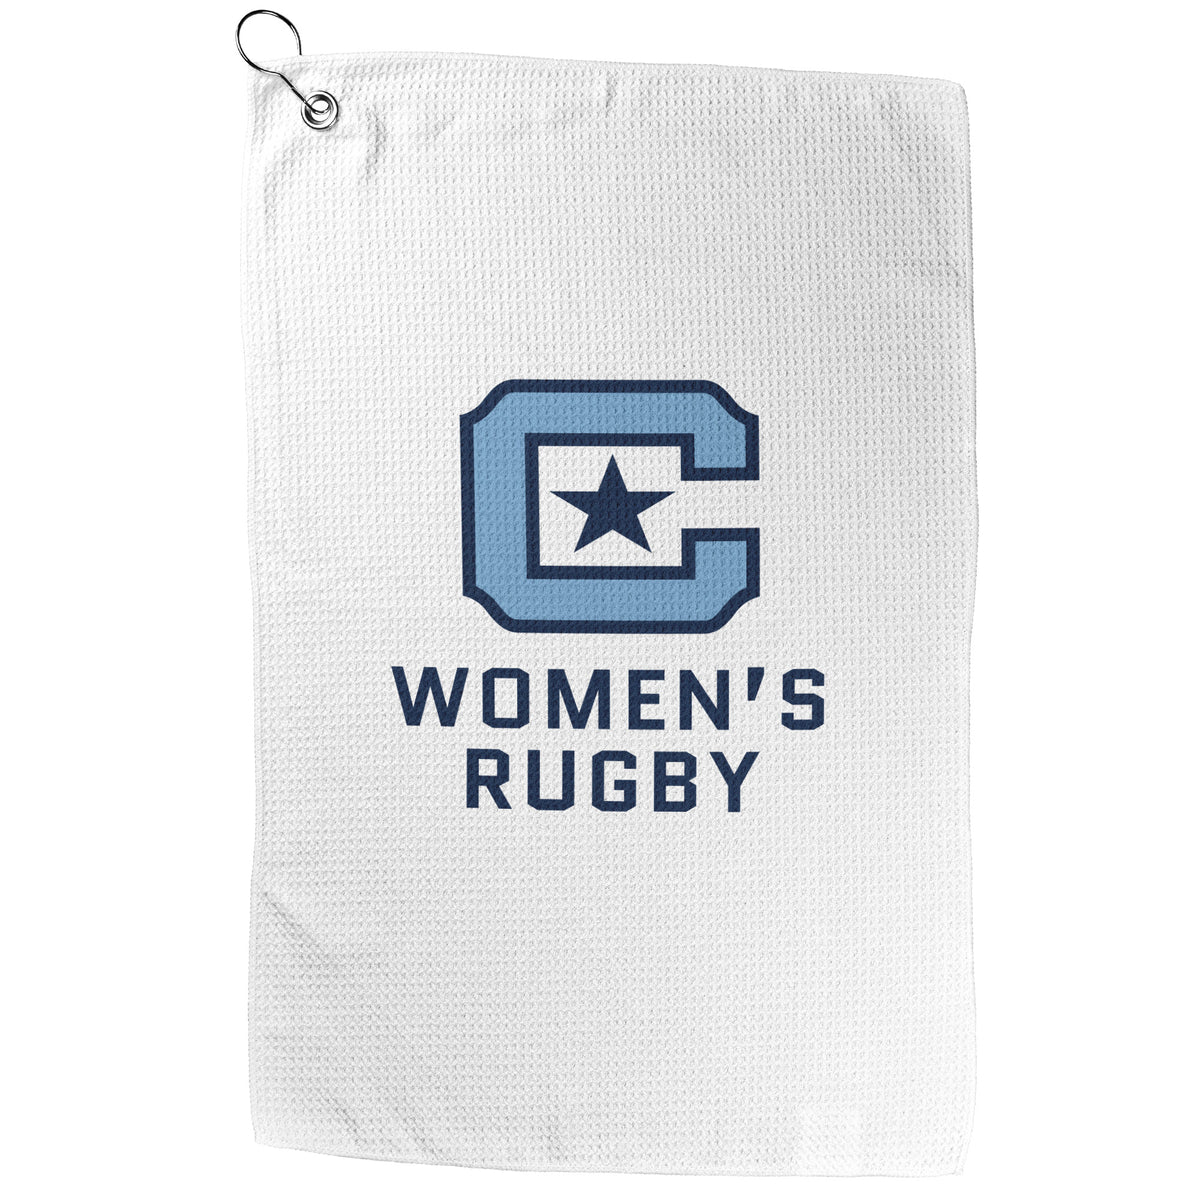 The Citadel, Club Sports Women's Rugby, Double Sided Golf Towel